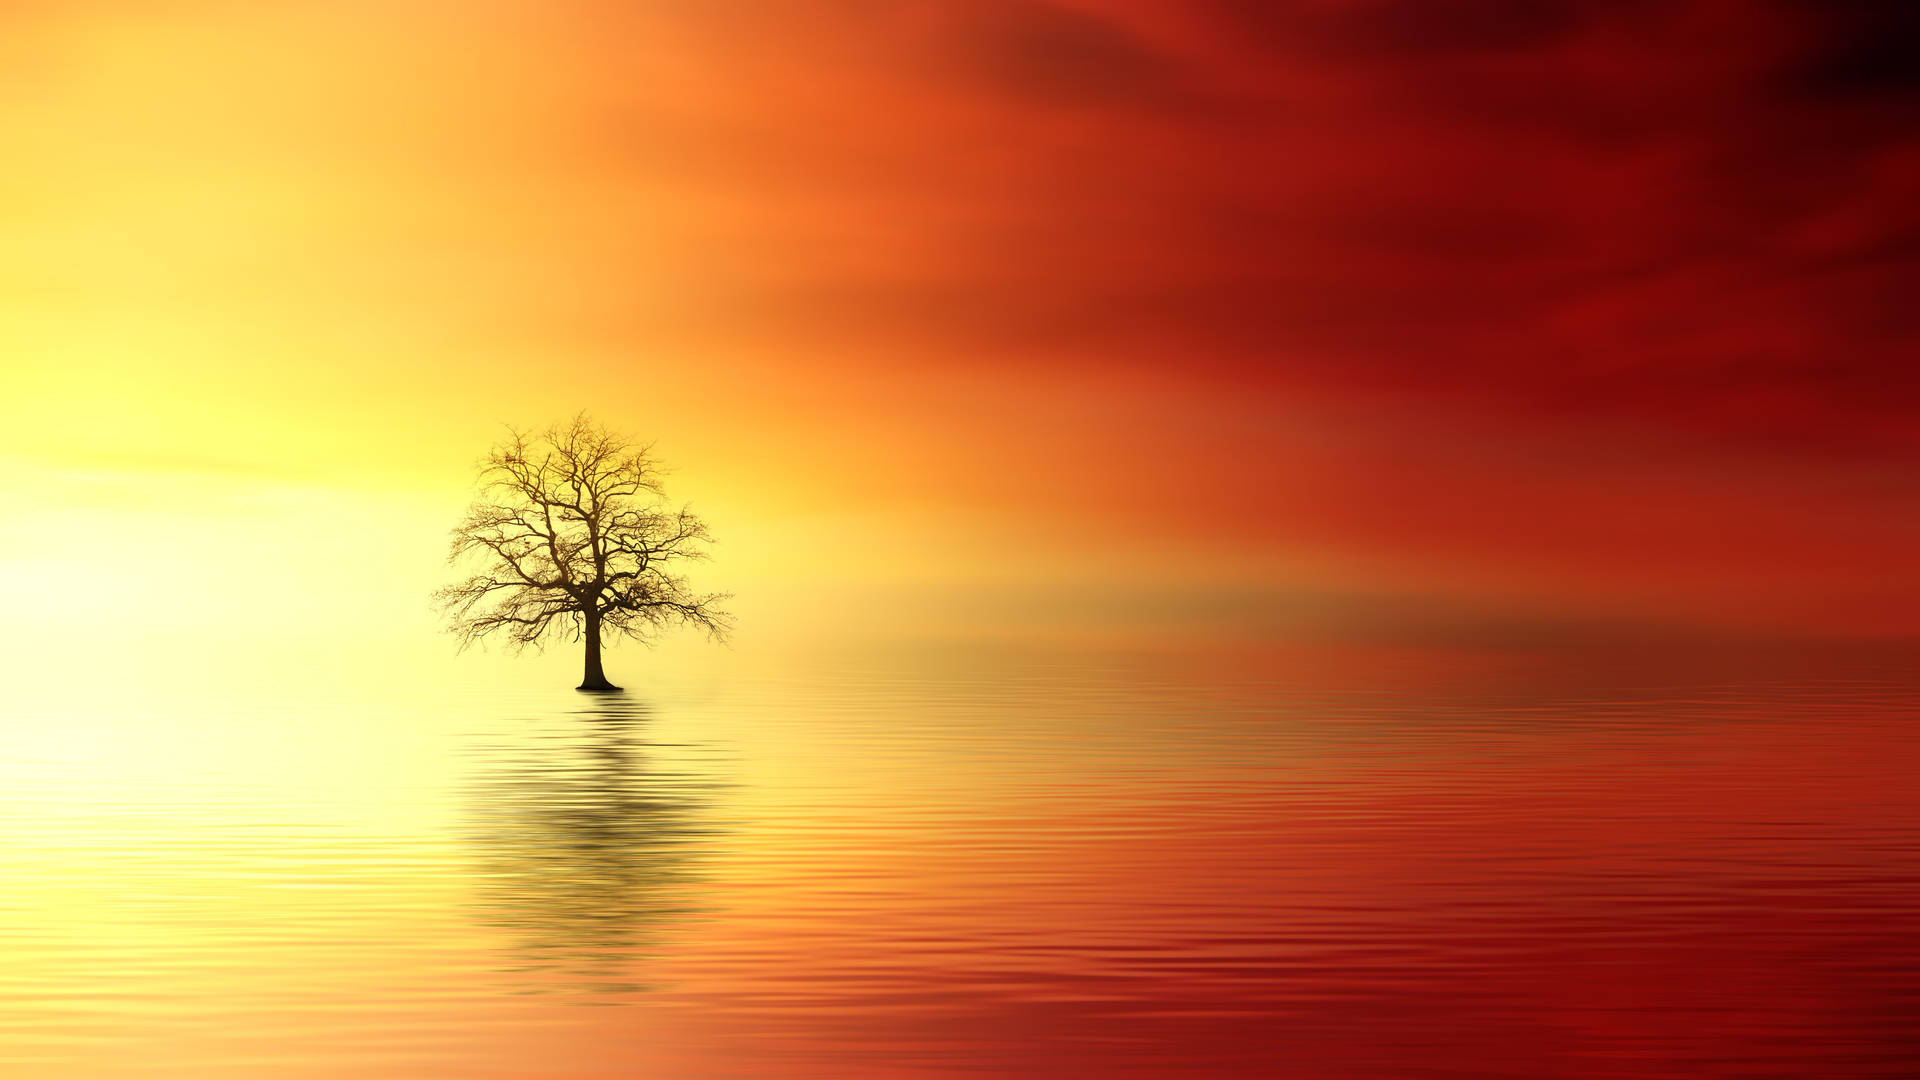 Tree Painting With Orange And Yellow Sunset